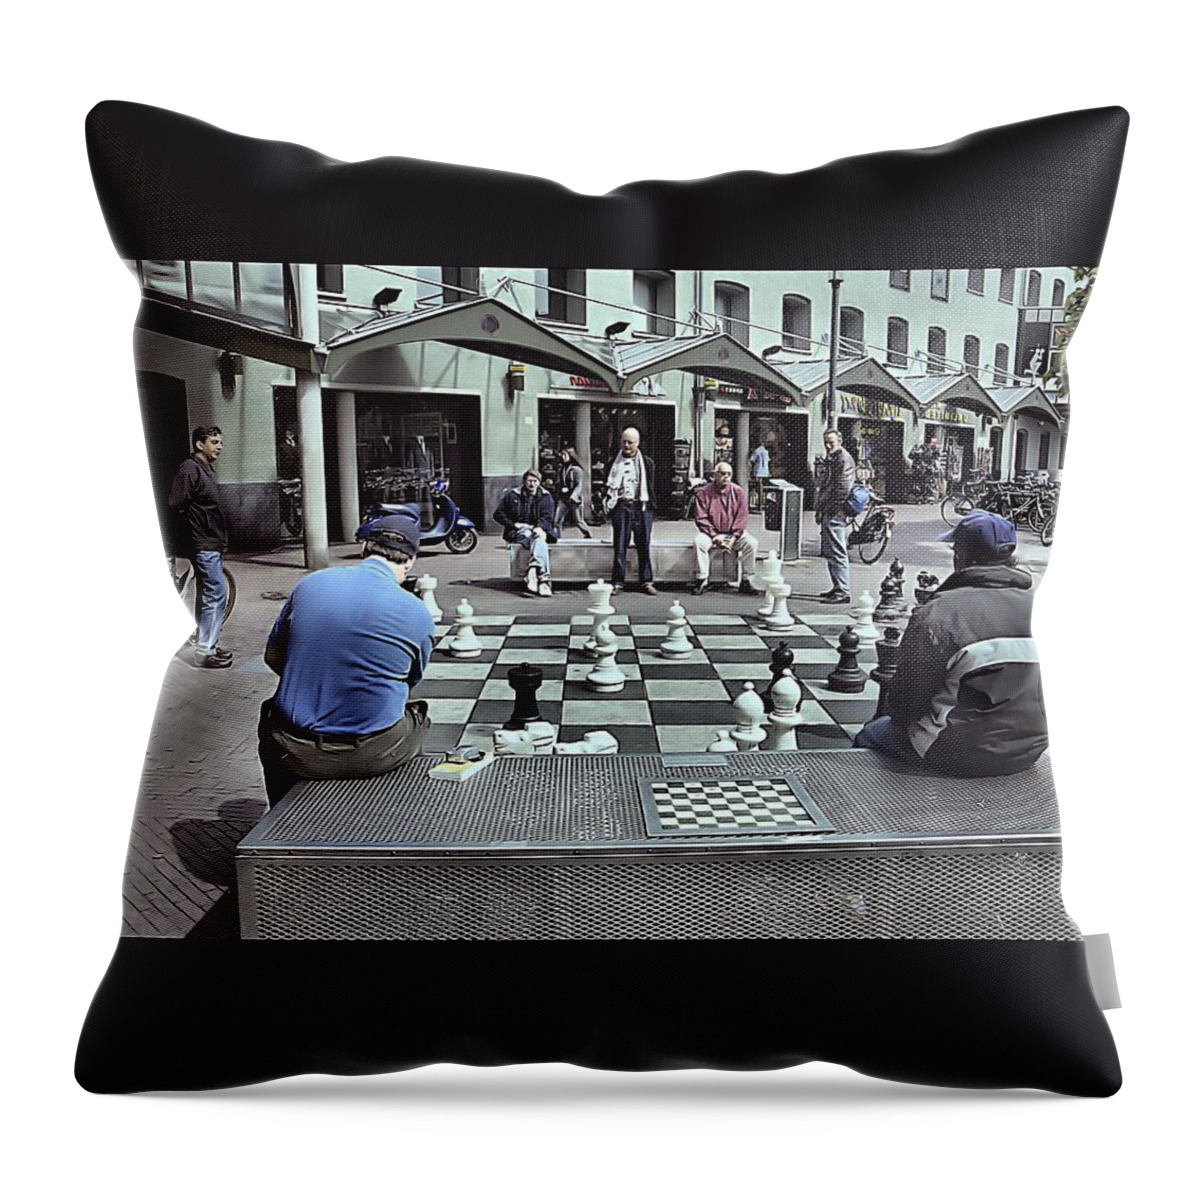 Amsterdam Throw Pillow featuring the photograph Amsterdam Chess Game by Steven Richman